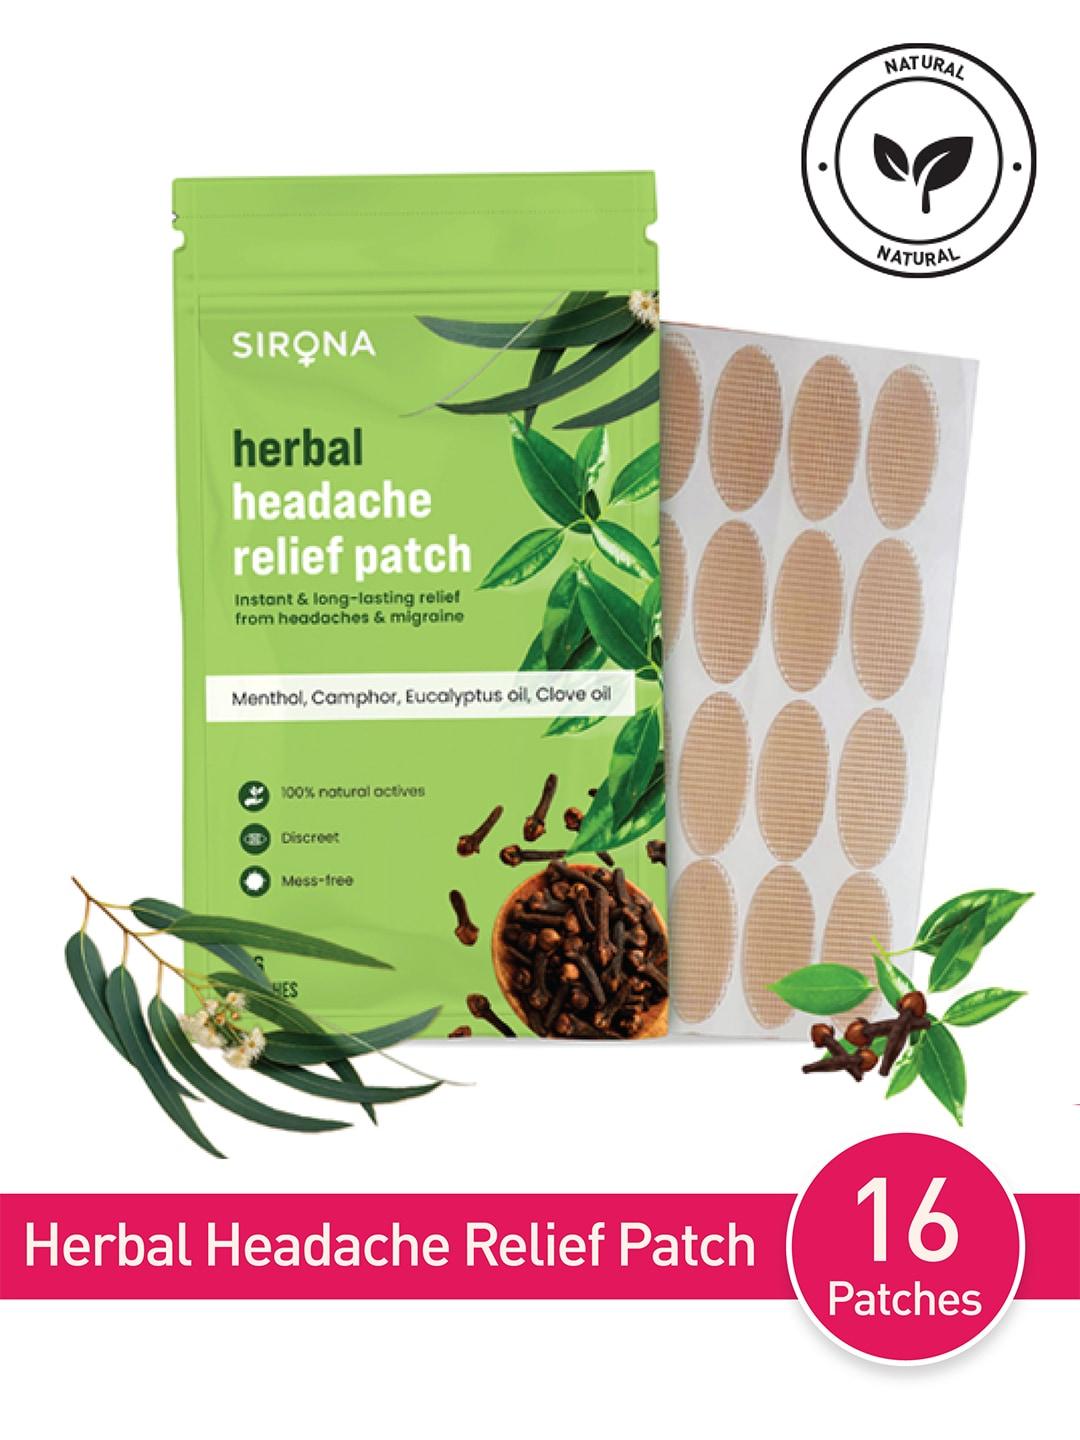 Sirona Herbal Headache Relief Patches -16 Patches